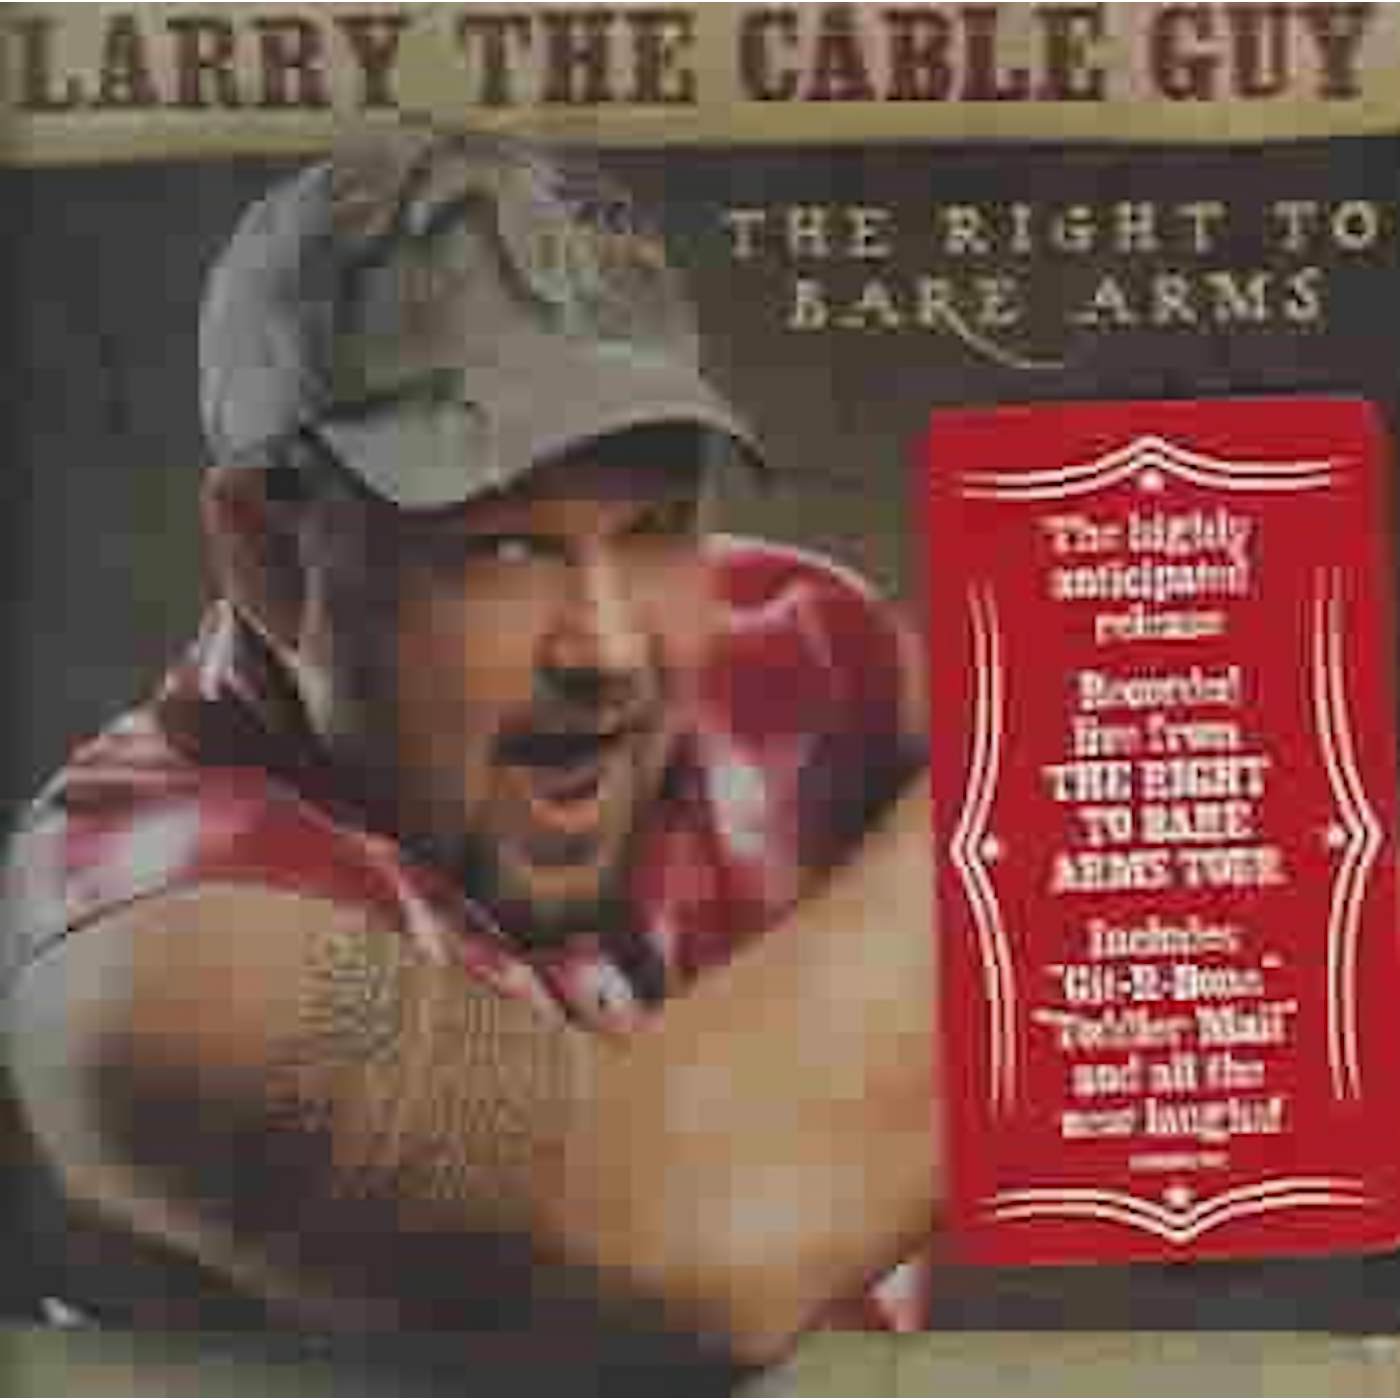 Larry The Cable Guy Right To Bare Arms CD